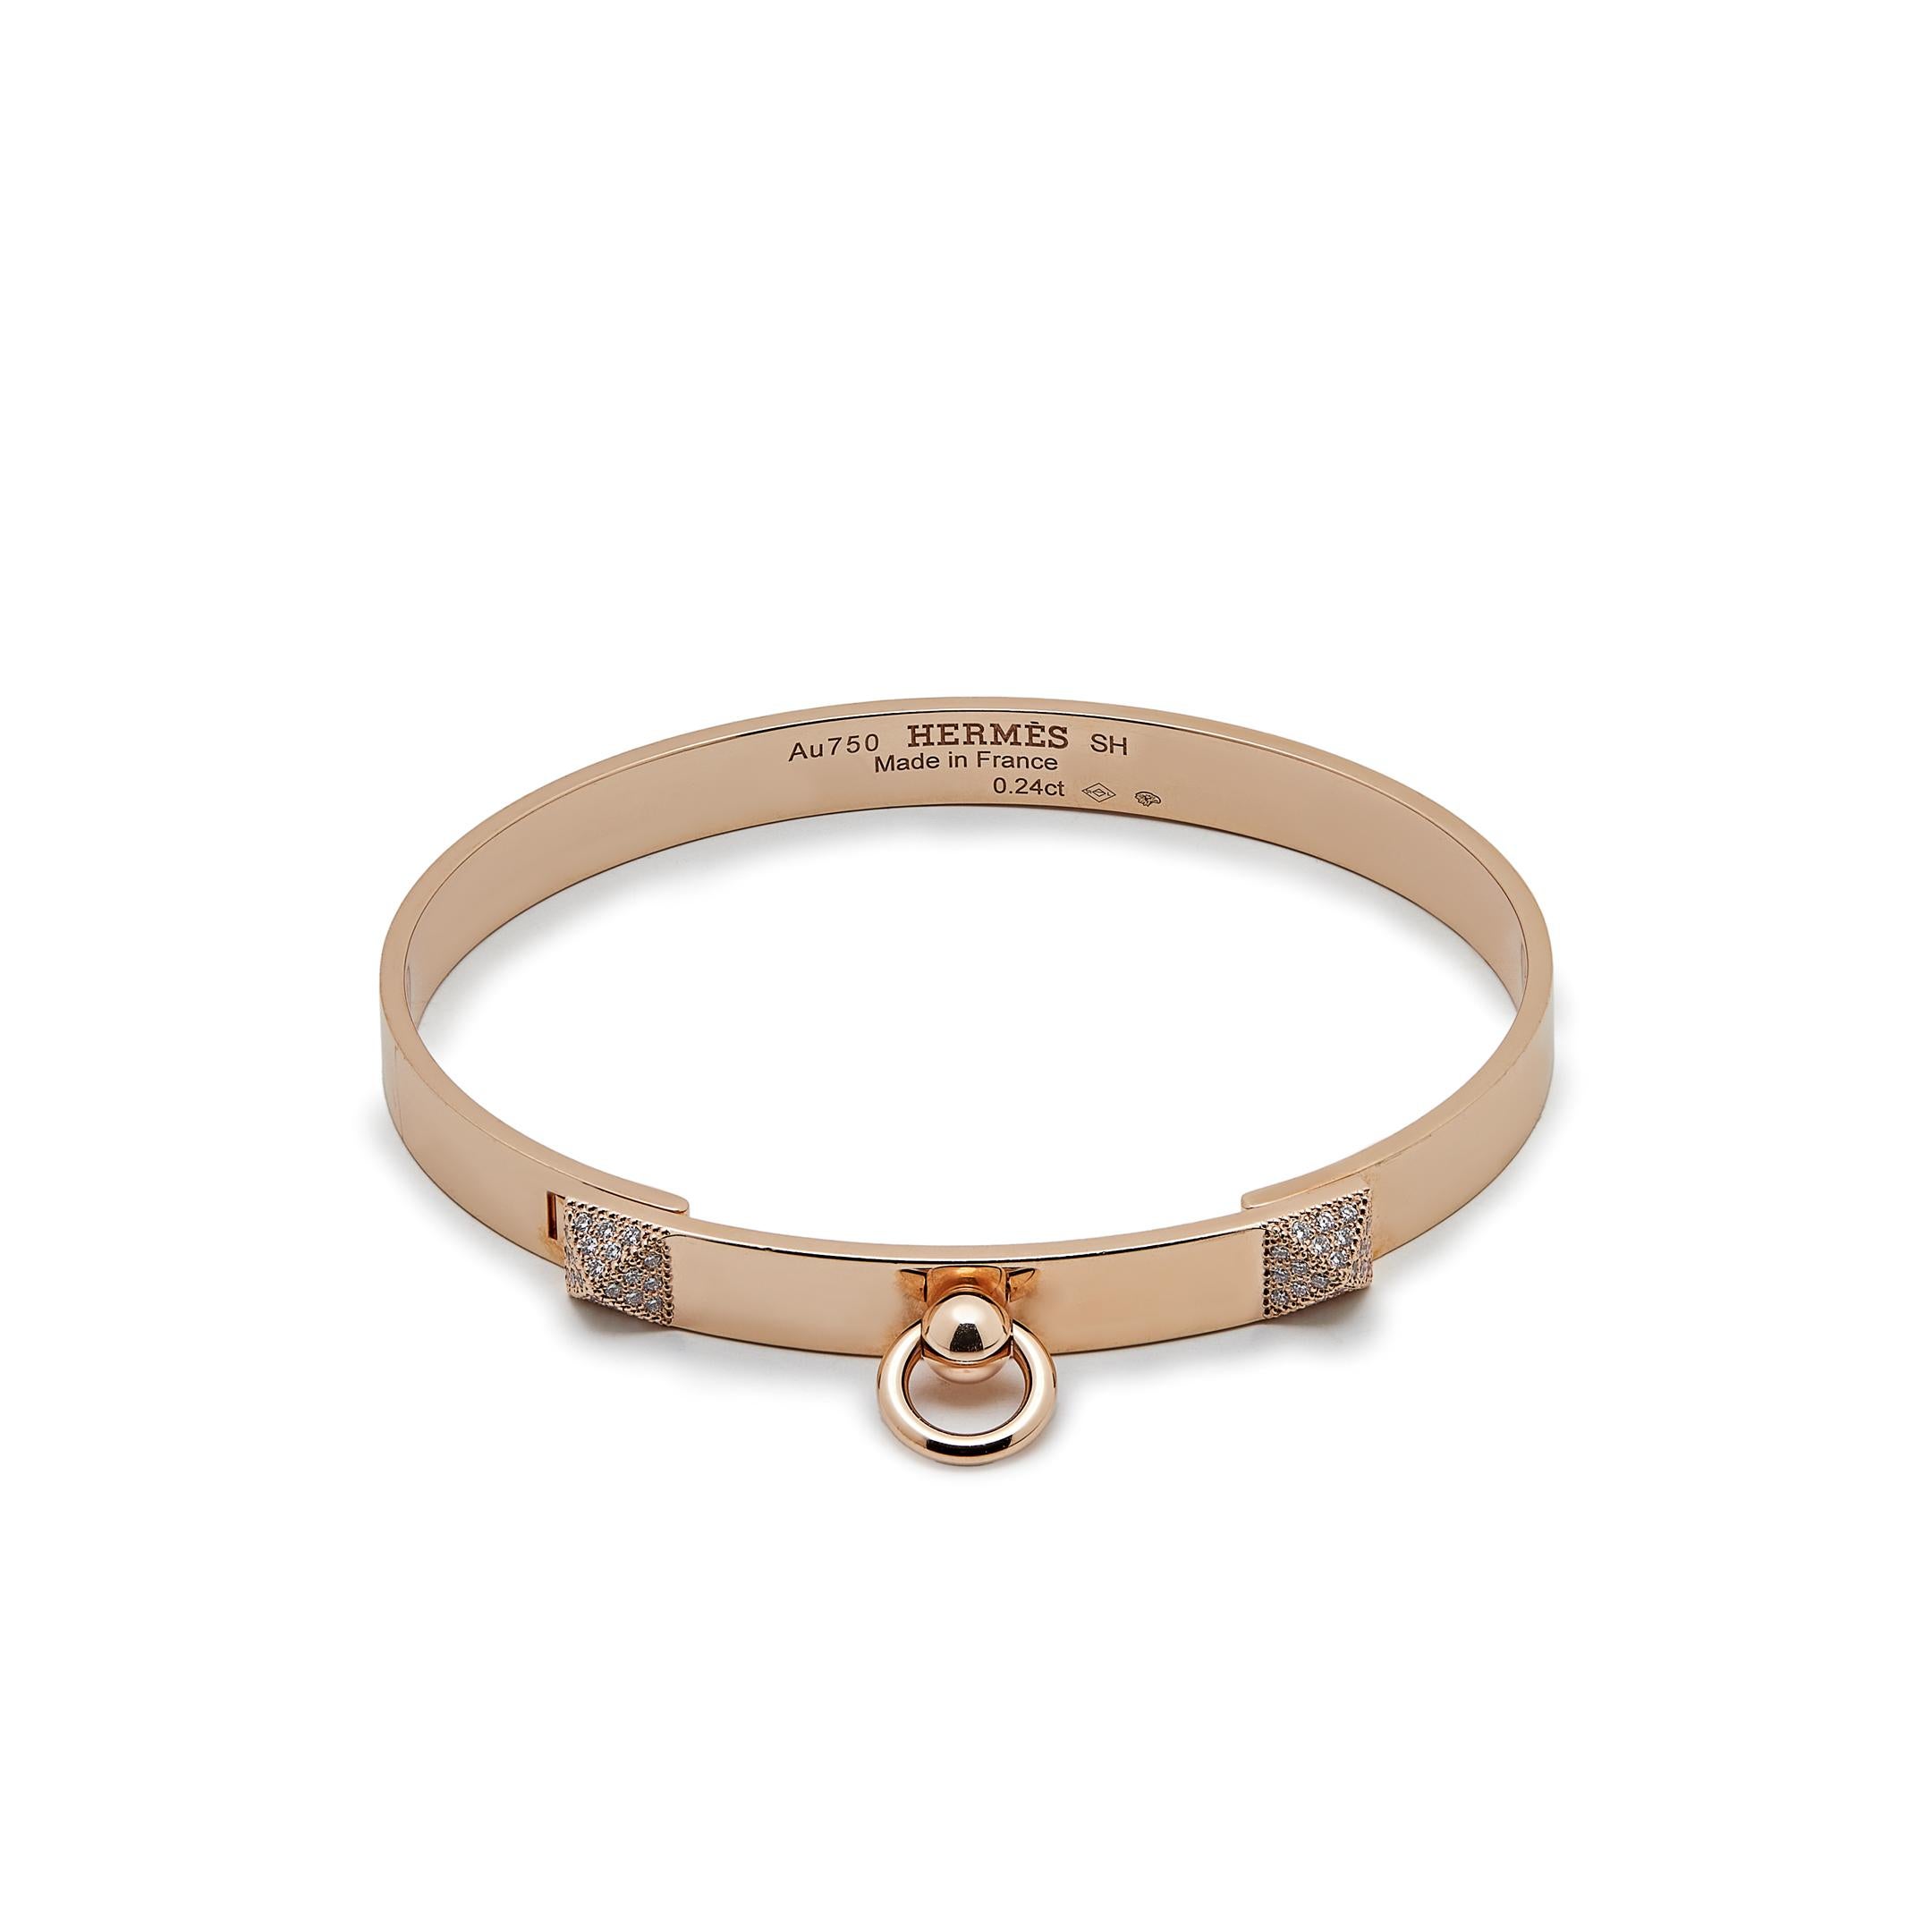 Hermés Collier de Chine Rose Gold Bracelet In Excellent Condition For Sale In New York, NY